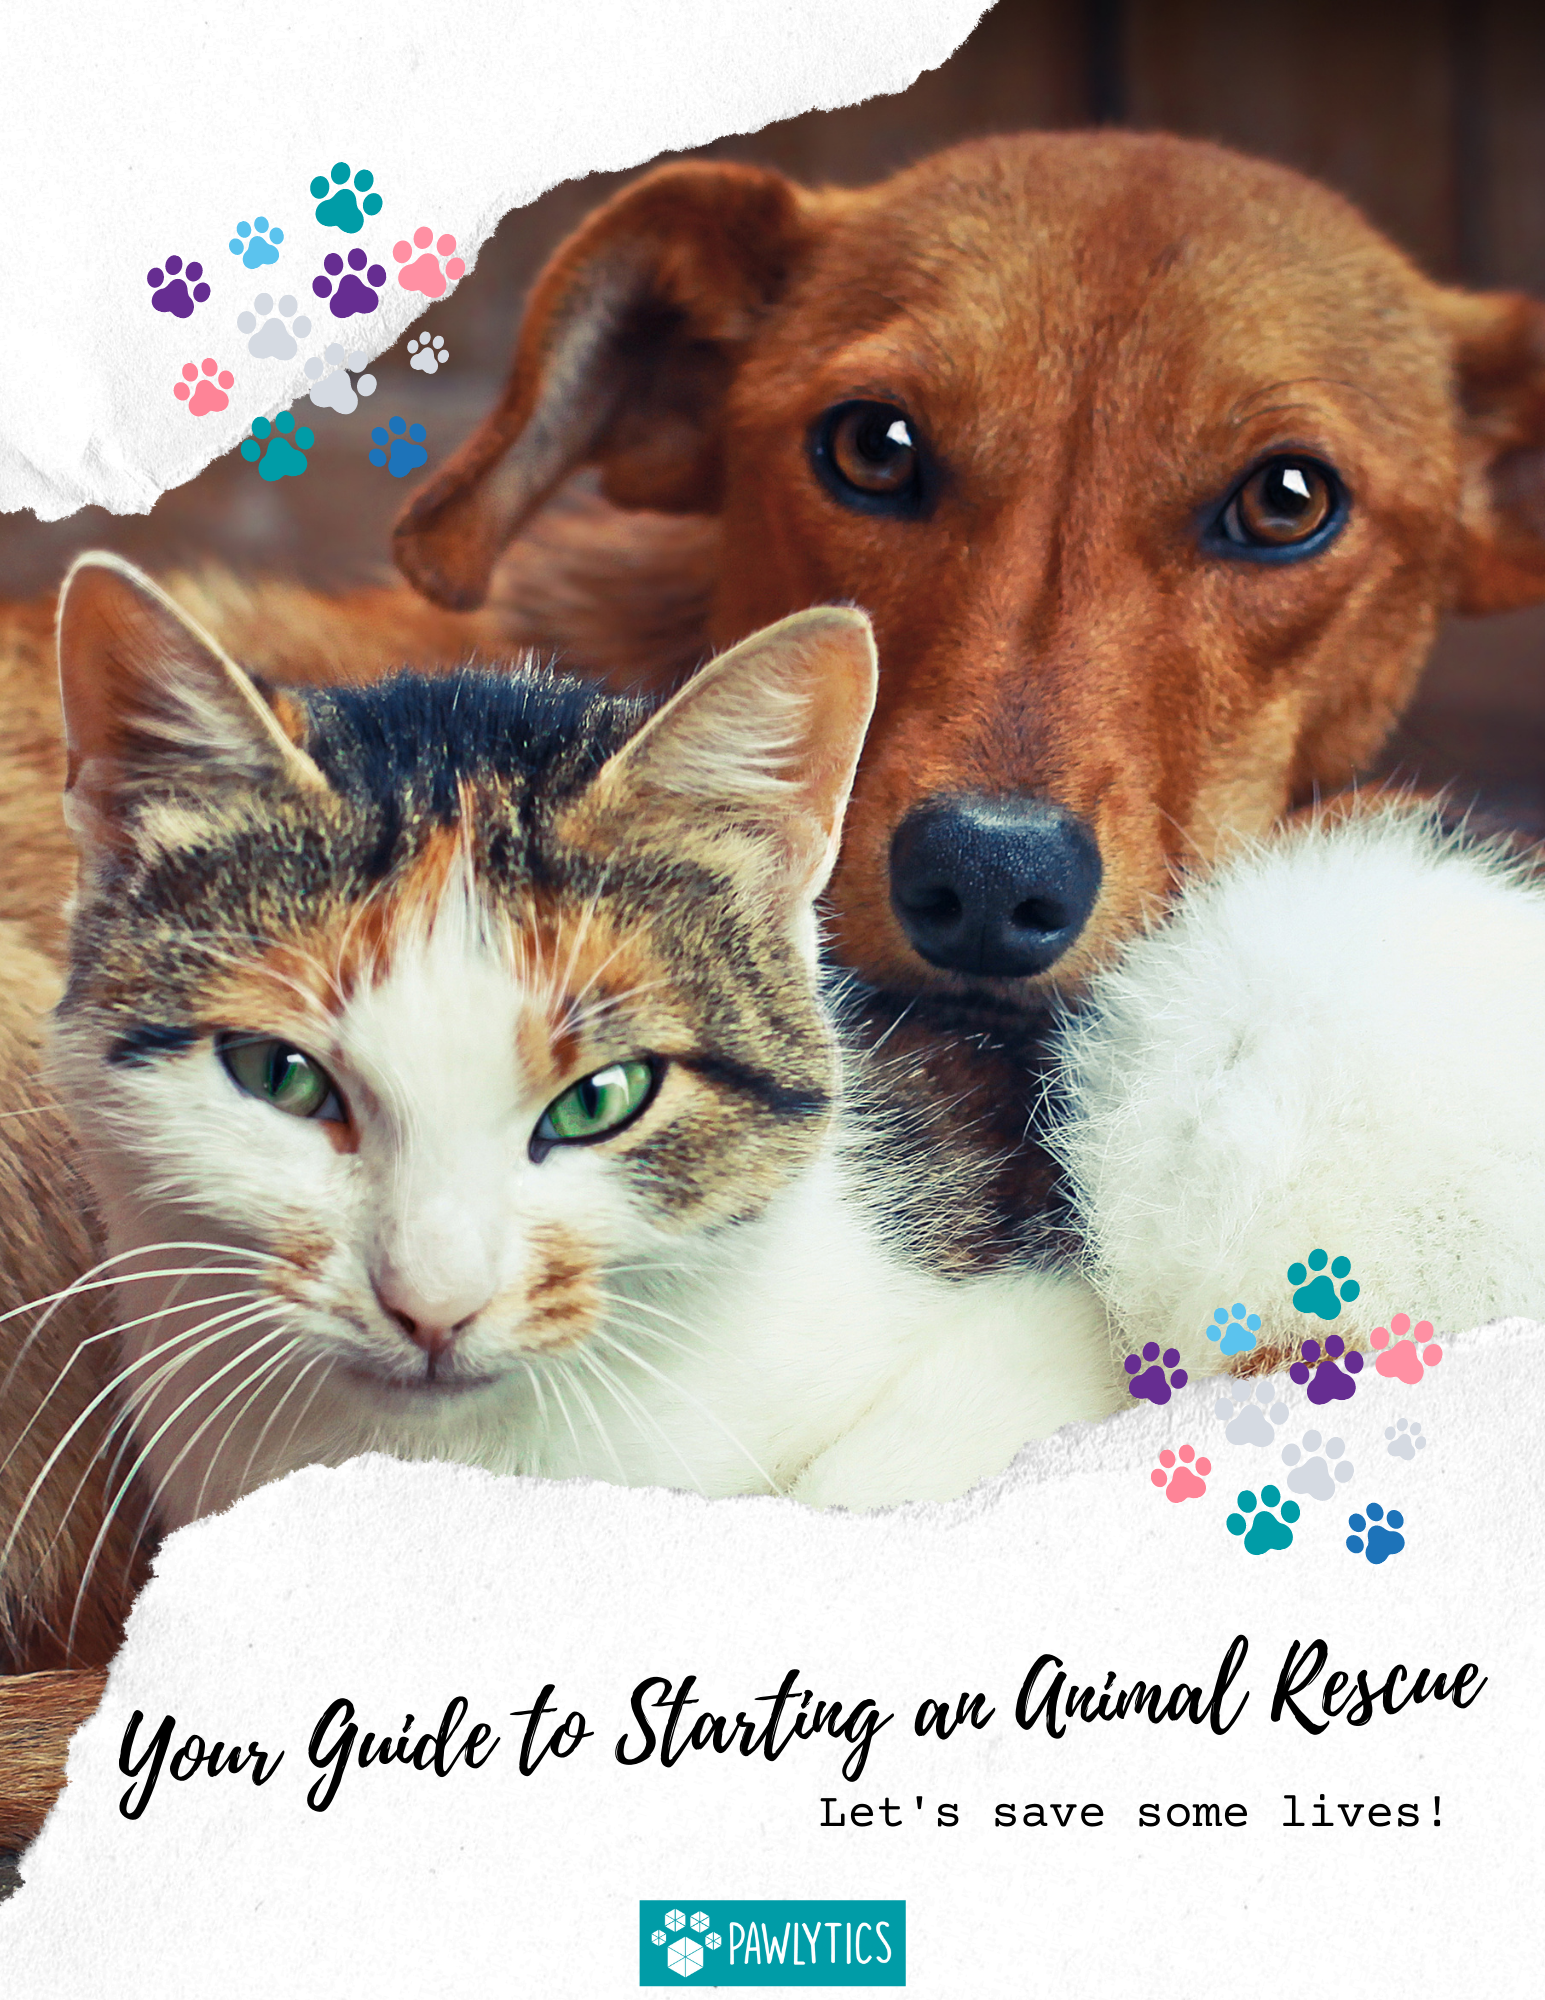 How to Start an Animal Rescue